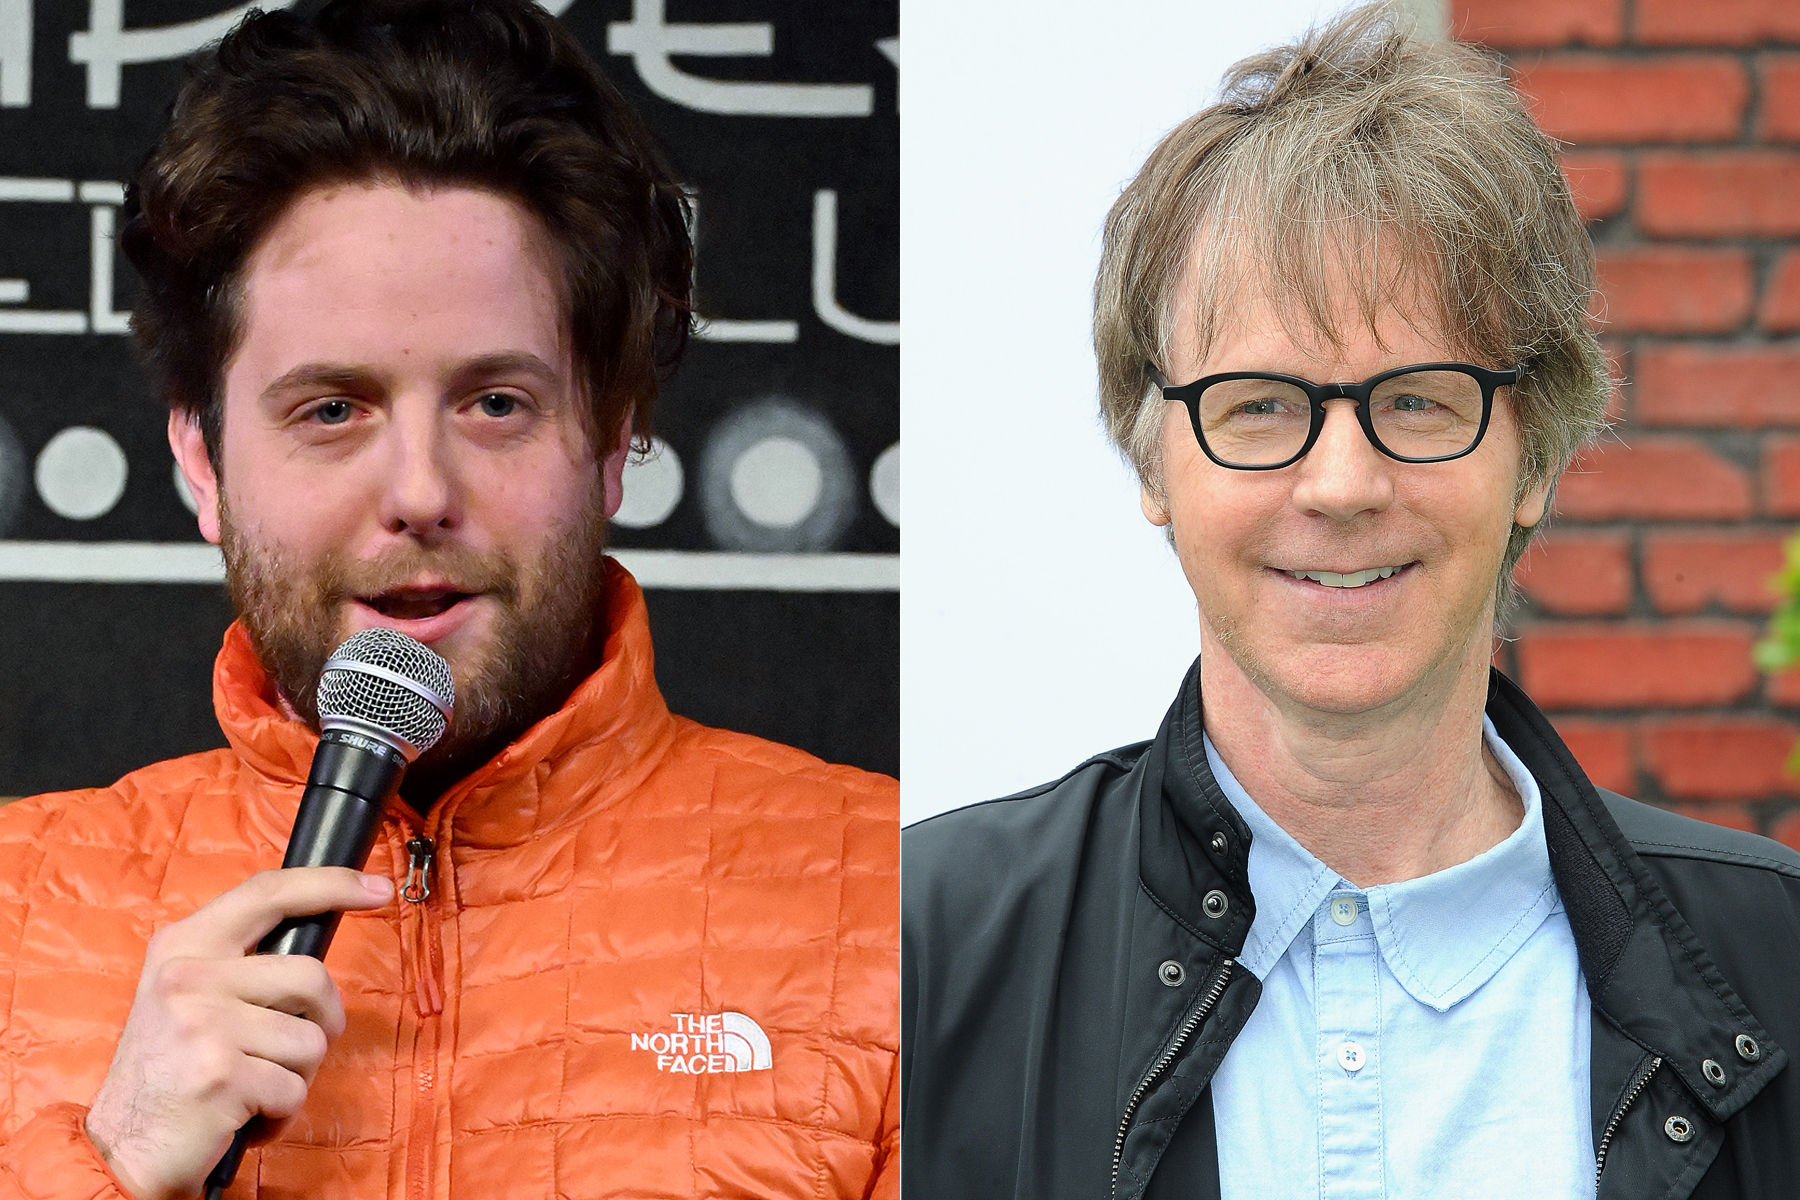 <p><span>"Saturday Night Live" alum and comedy star Dana Carvey and wife Paula Zwagerman's son Dex Carvey -- a stand-up comedian -- died on Nov. 15, 2023.</span></p><p>The "Wayne's World" star and his spouse announced the sad news on social media hours later. "Our beloved son, Dex, died of an accidental drug overdose. He was 32 years old," they began.</p><p>"Dex packed a lot into those 32 years. He was extremely talented at so many things -- music, art, film making, comedy -- and pursued all of them passionately," they continued. "It's not an exaggeration to say that Dex loved life. And when you were with him, you loved life too. He made everything fun. But most of all, he loved his family, his friends and his girlfriend, Kaylee. Dex was a beautiful person. His handmade birthday cards are a treasure. We will miss him forever."</p><p>They concluded the post with a message to other parents and families facing a similar heartbreak. "To anyone struggling with addiction or who loves someone struggling with addiction," they wrote, "you are in our hearts and prayers."</p><p>In January 2024, the Los Angeles County Medical Examiner released the results of toxicology tests, confirming Dex's official cause of death as fentanyl, ketamine and cocaine toxicity.</p>